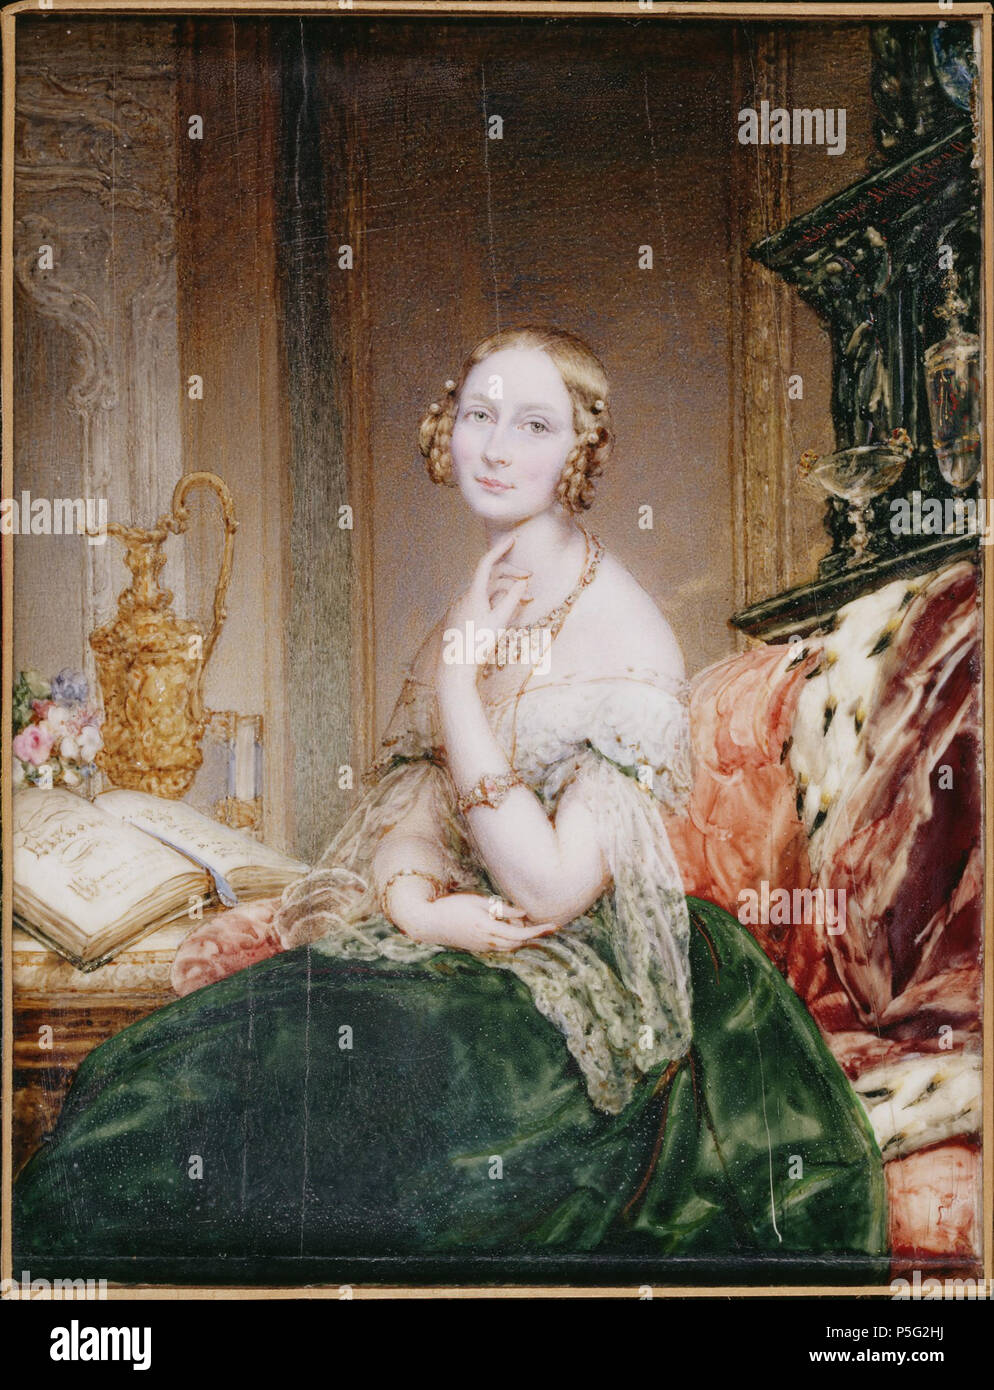 N/A.  :     (1807-1873) Portrait of Grand Duchess Elena Pavlovna Christina Robertson was a British portrait and miniature painter. Born Christina Saunders in Kinghorn, Fife, Scotland, Robertson learned to paint miniatures from her uncle, George Saunders, a miniaturist based in London. Robertson developed a successful portrait career and often traveled abroad in search of new clients. From 1839-1841, Robertson lived and worked in St. Petersburg, Russia. After spending eight years in her London studio, Robertson returned to Russia in 1849 to work as a portraitist for the imperial family. The sit Stock Photo